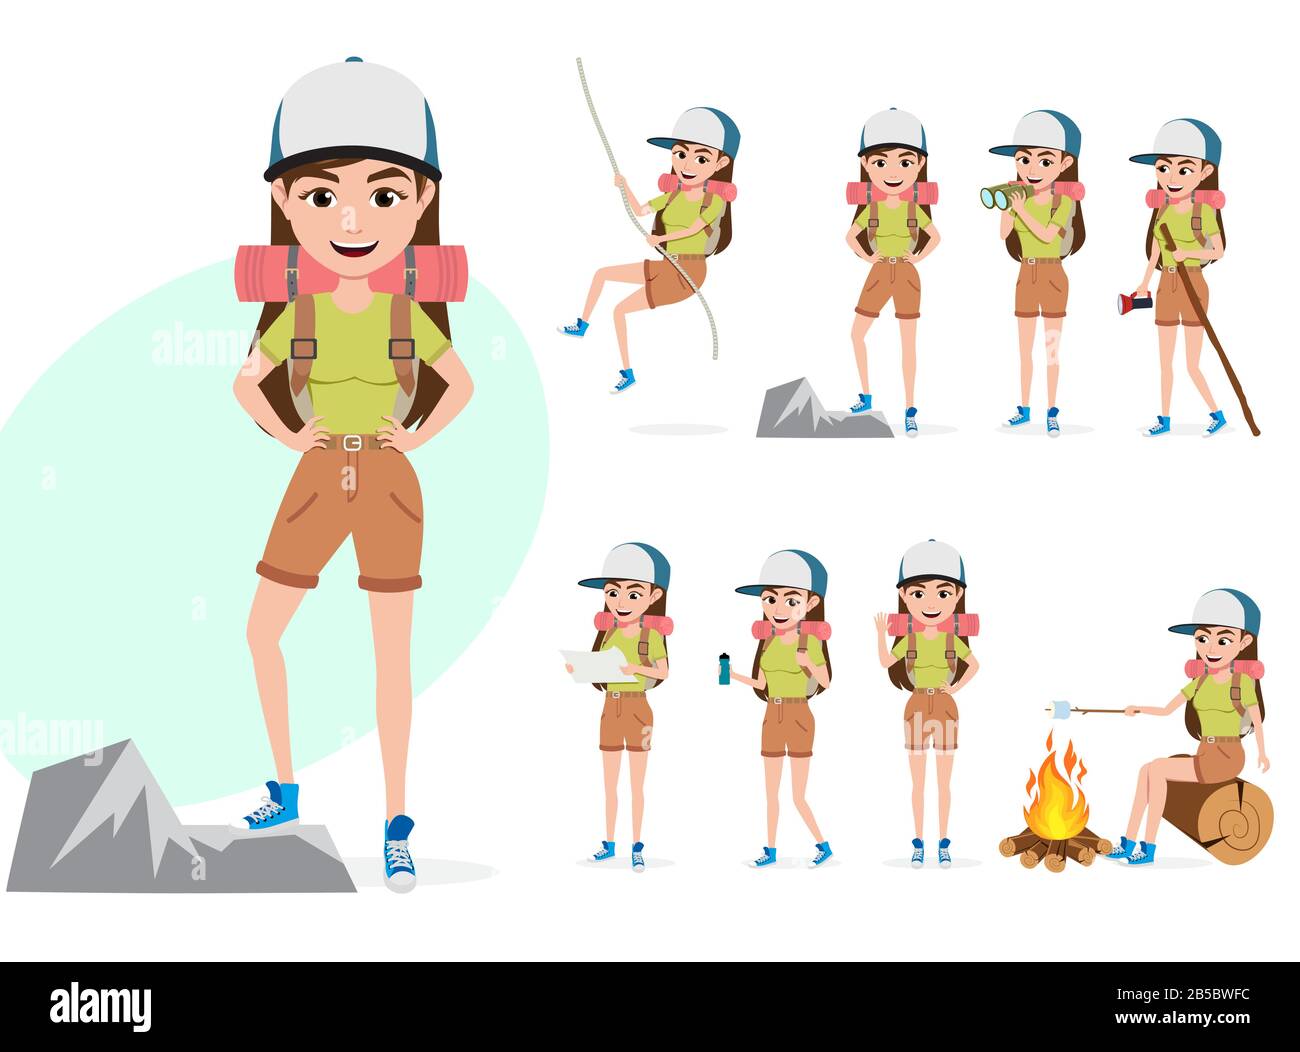 Female mountain climber vector character set. Woman hiker character in different summer hiking activities and standing poses like rope climbing. Stock Vector